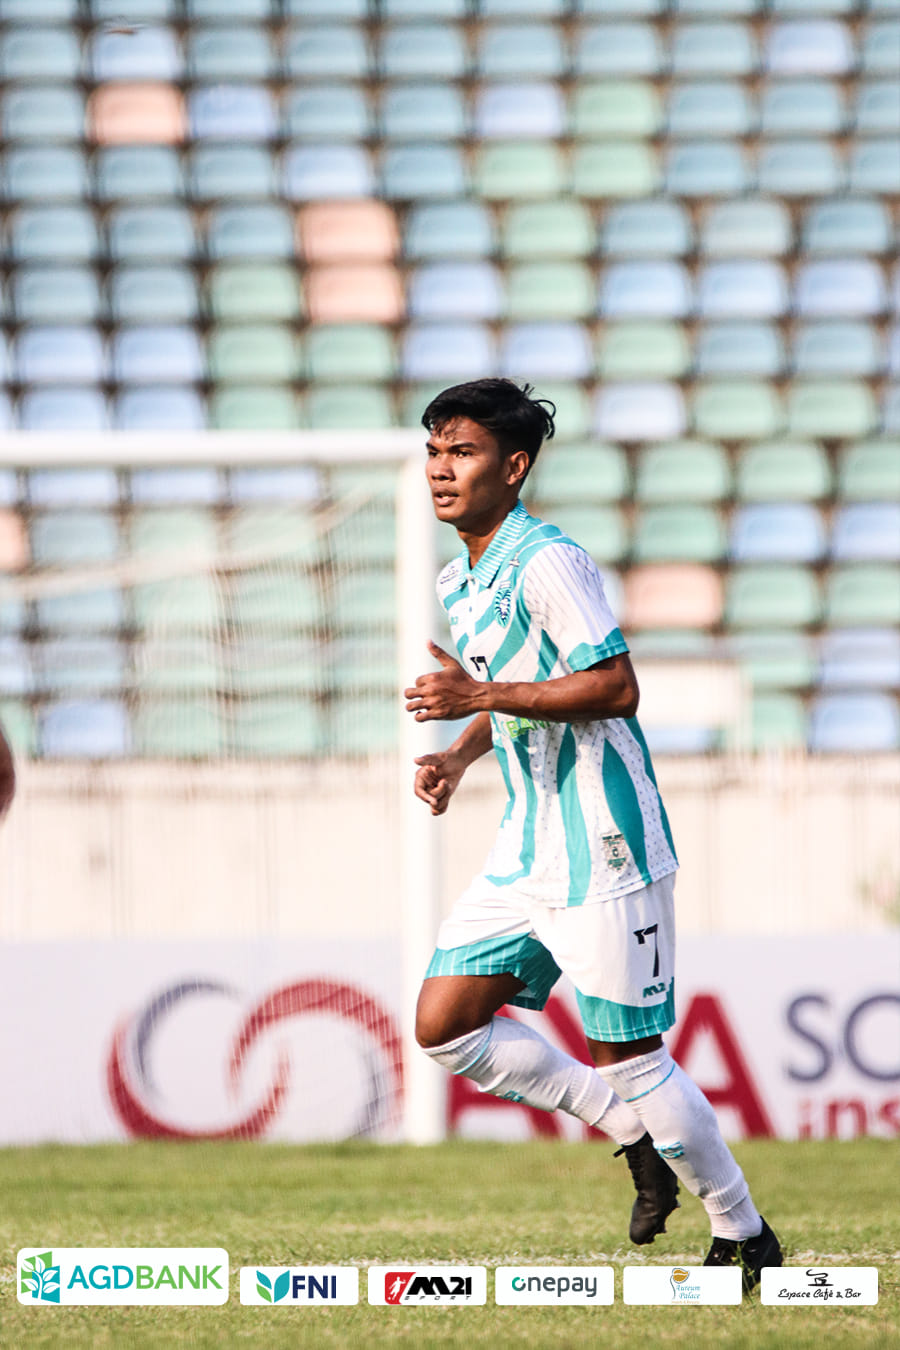 Yangon United midfielder Zaw Win Thein revealed to focus on every single match with unity